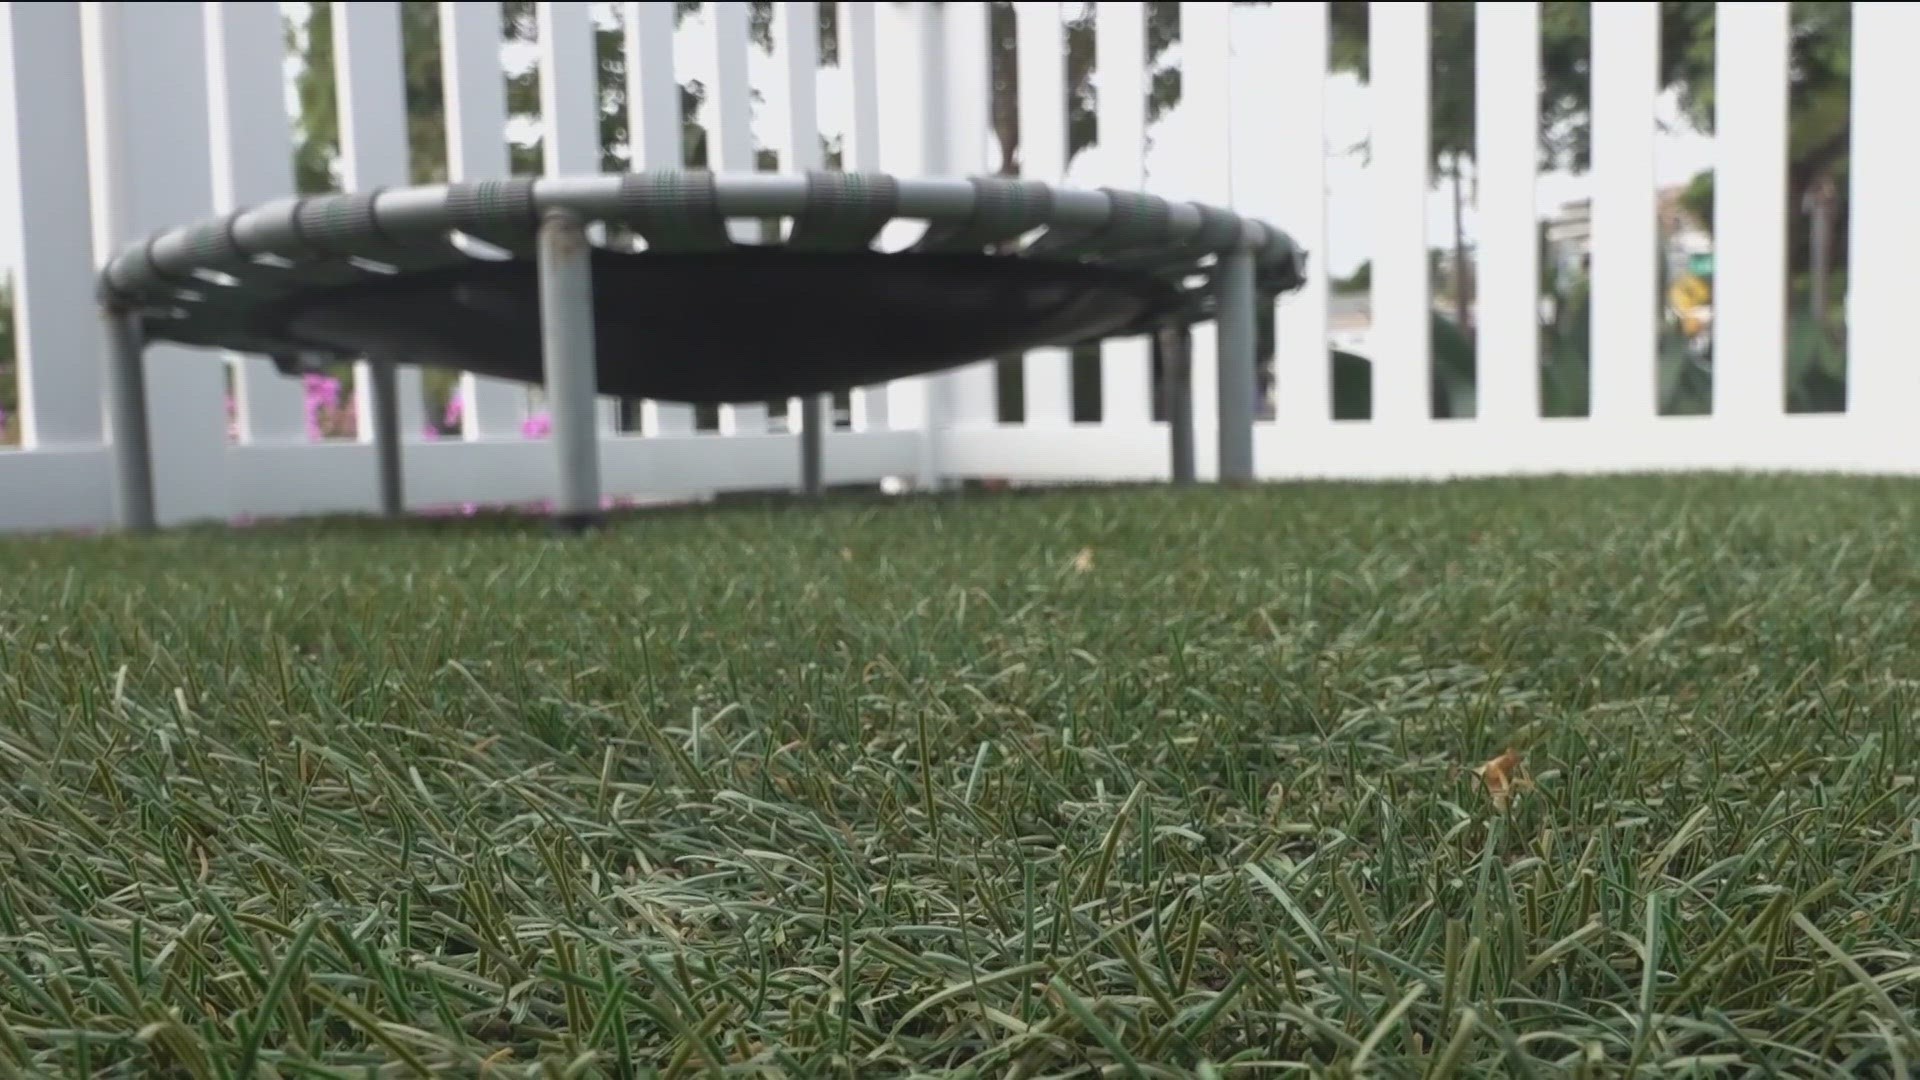 Governor Gavin Newsom signed a bill allowing local governments to ban artificial turf in residential areas.